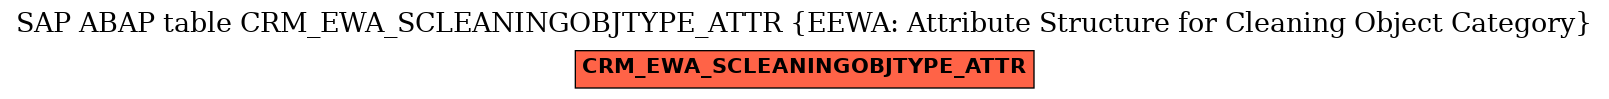 E-R Diagram for table CRM_EWA_SCLEANINGOBJTYPE_ATTR (EEWA: Attribute Structure for Cleaning Object Category)